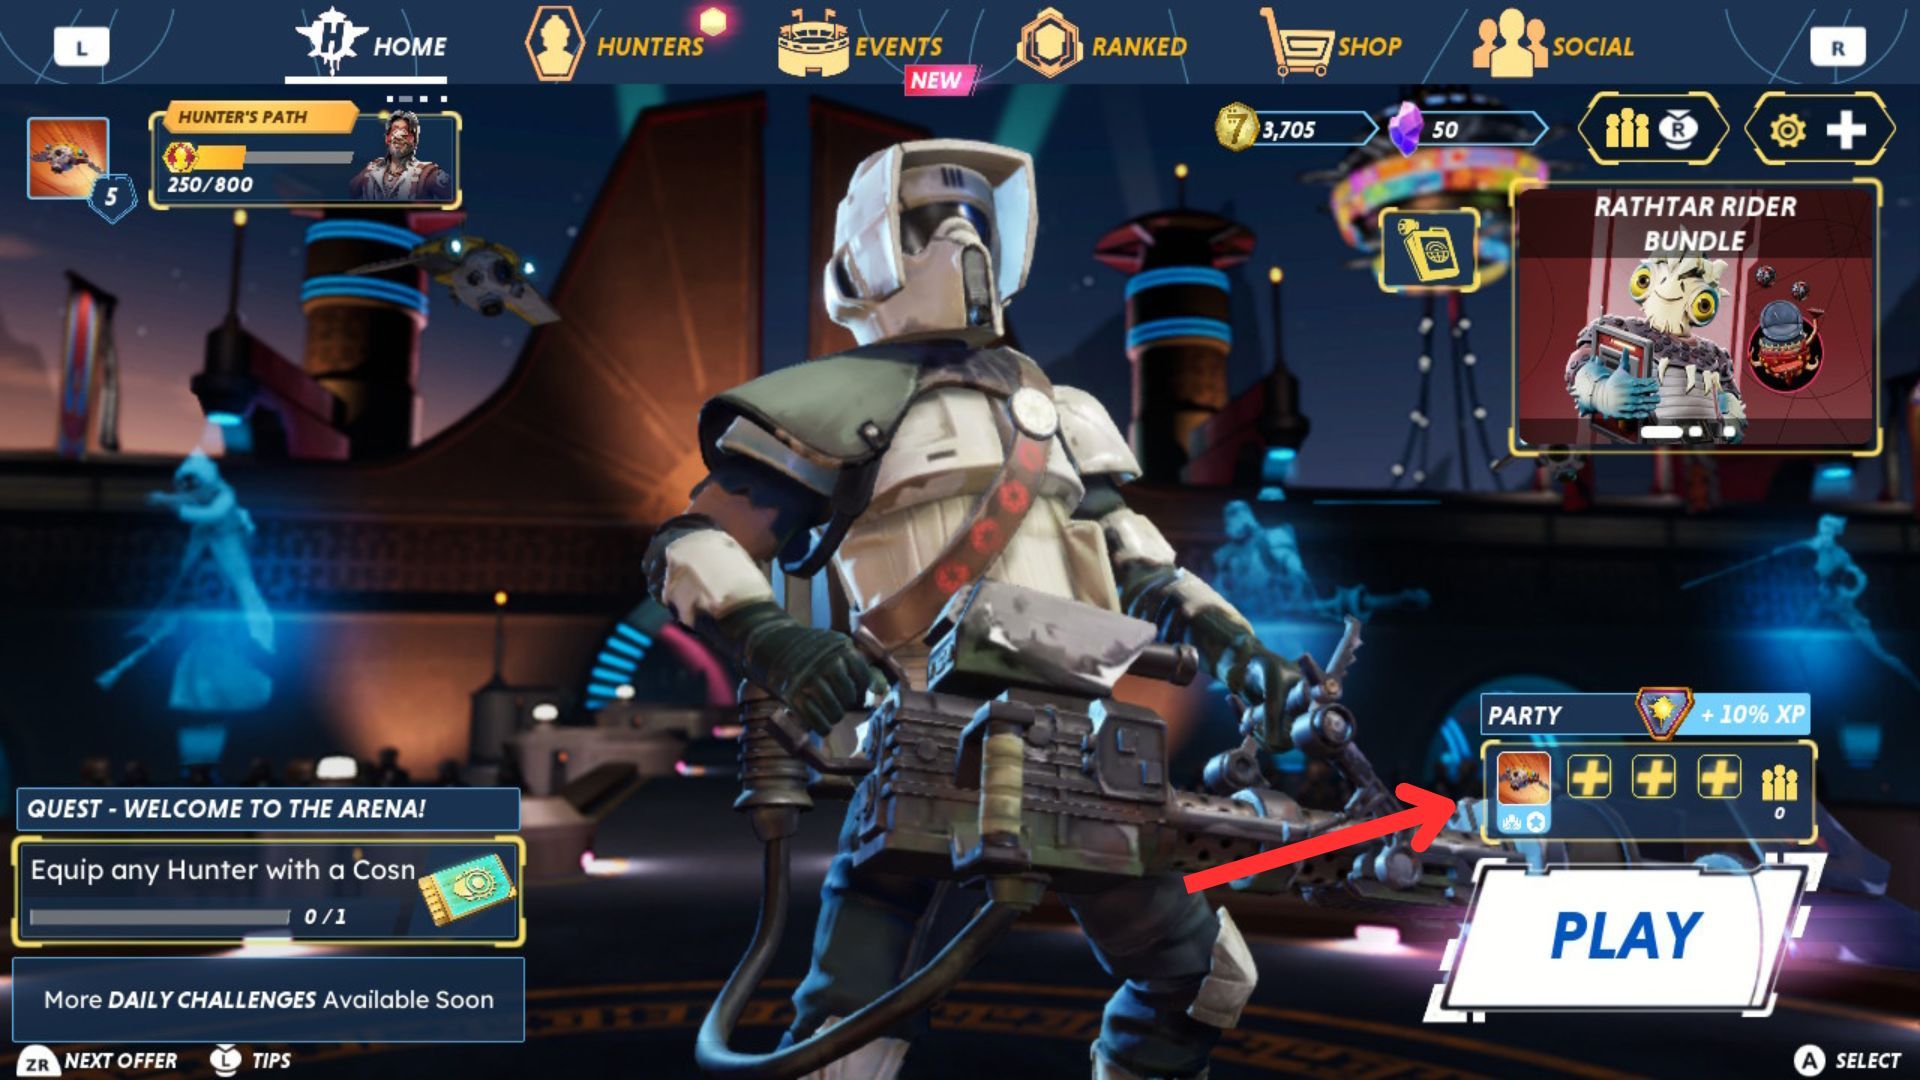 The main menu in Star Wars: Hunters, showing where the Party option is